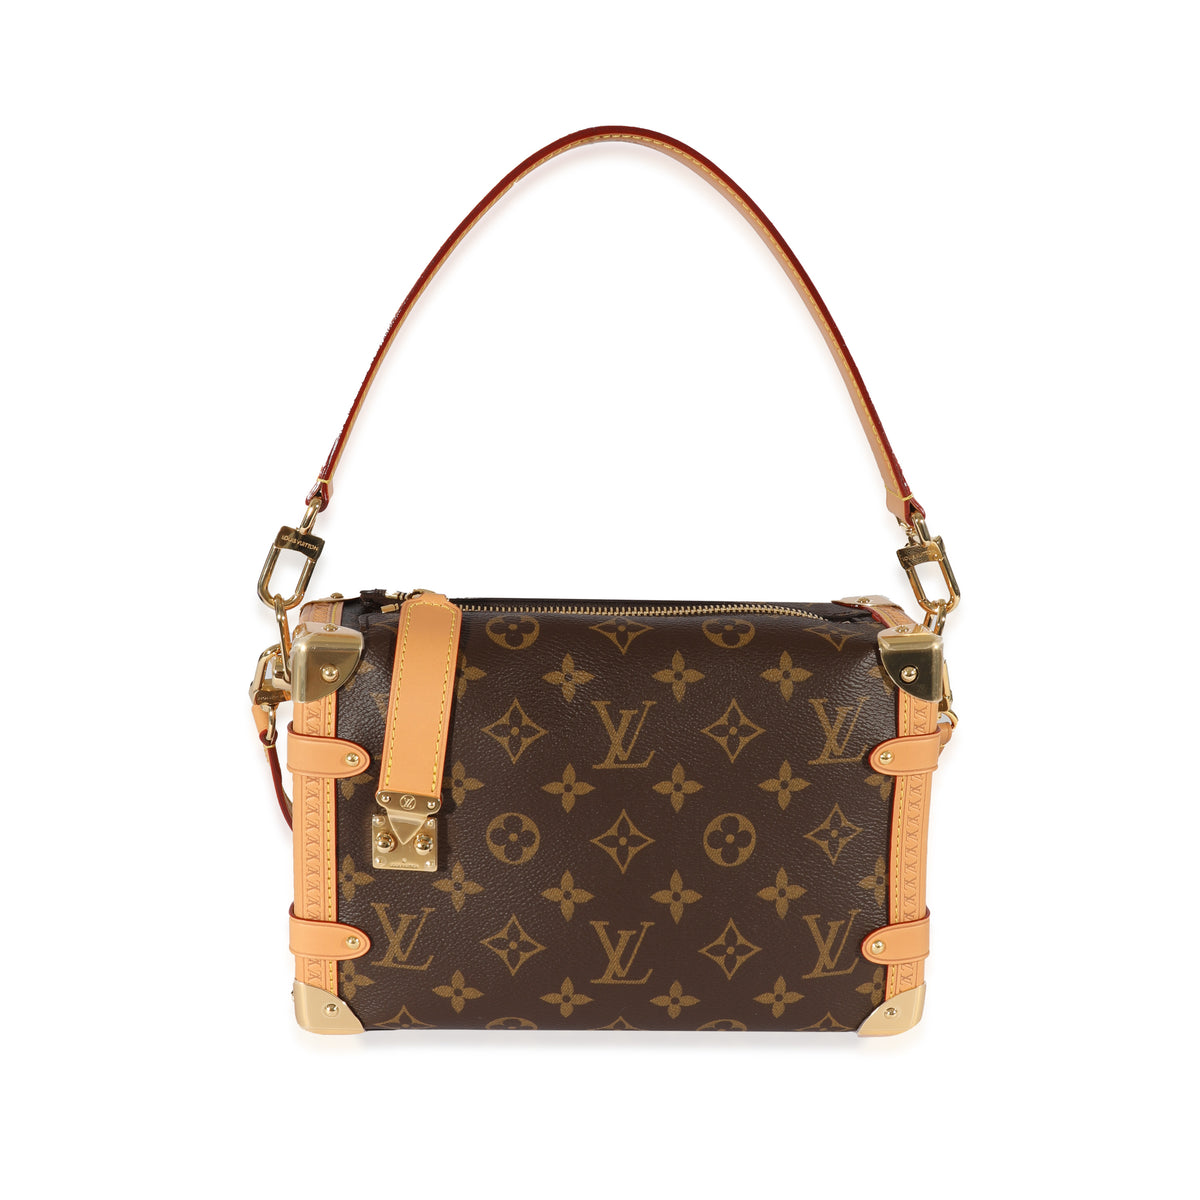 Louis Vuitton Side Trunk, Brown, One Size